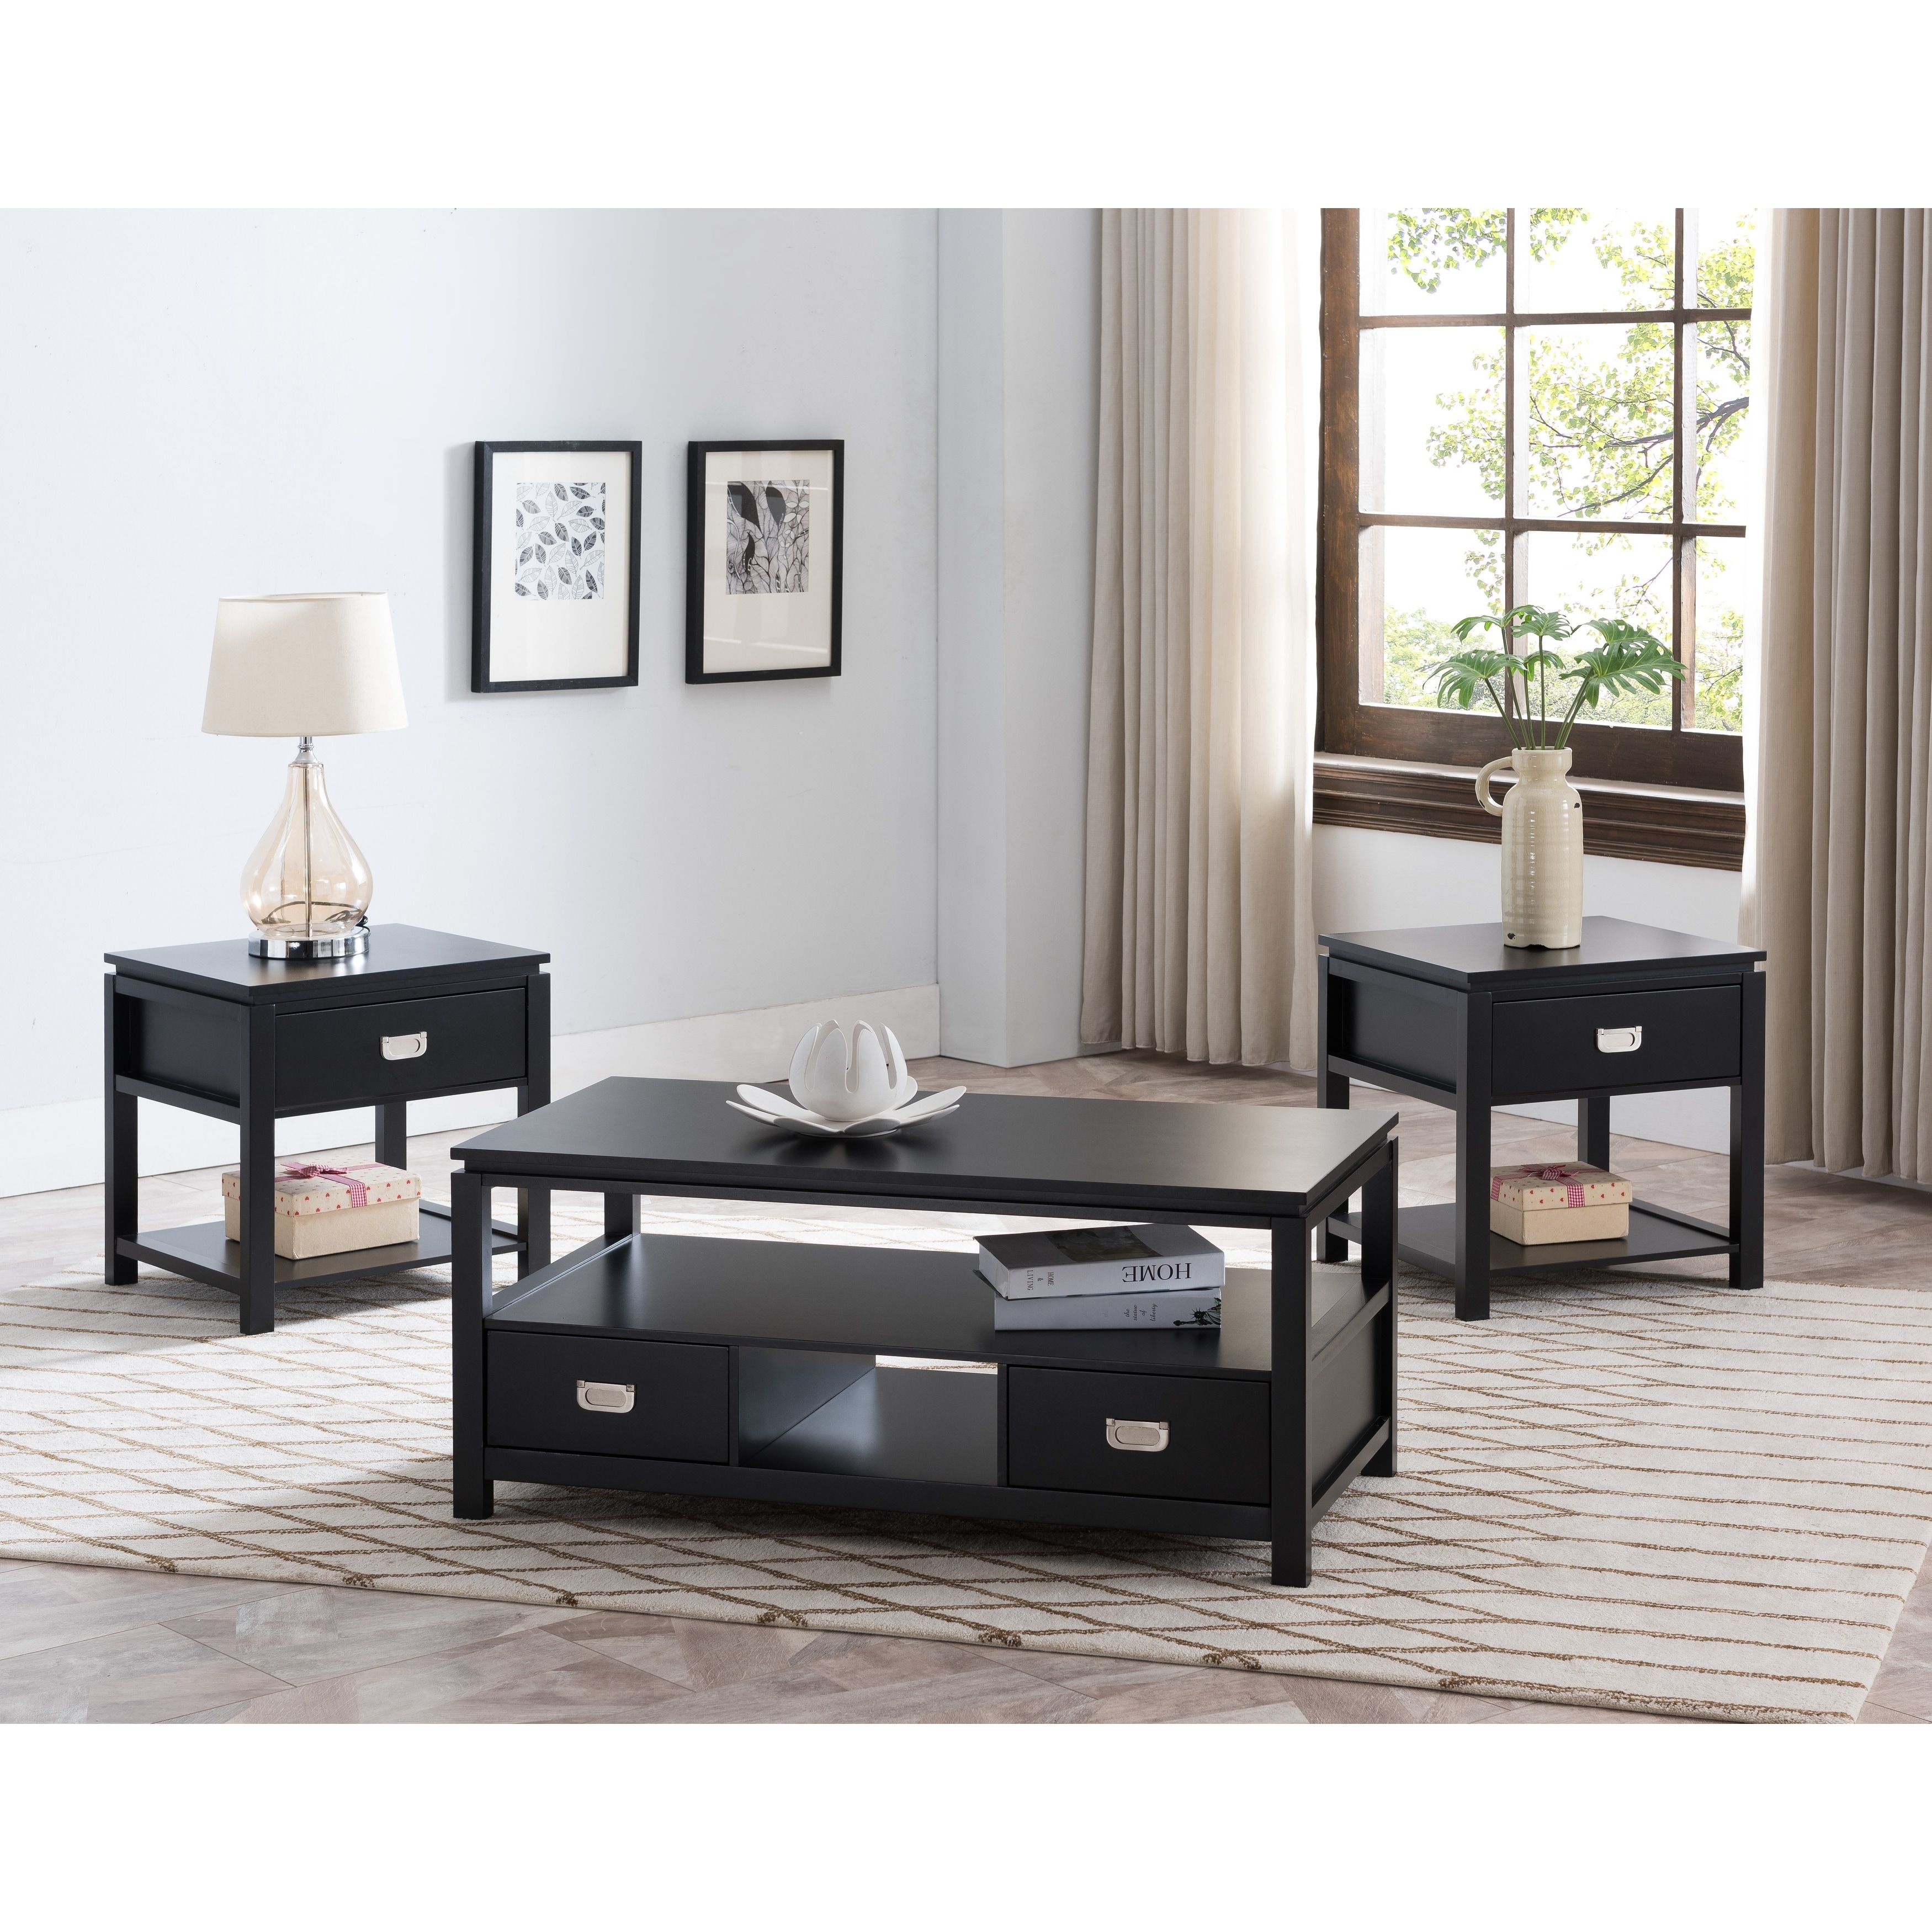 Featured image of post Black Wood Coffee Table Set - Free delivery &amp; warranty available.